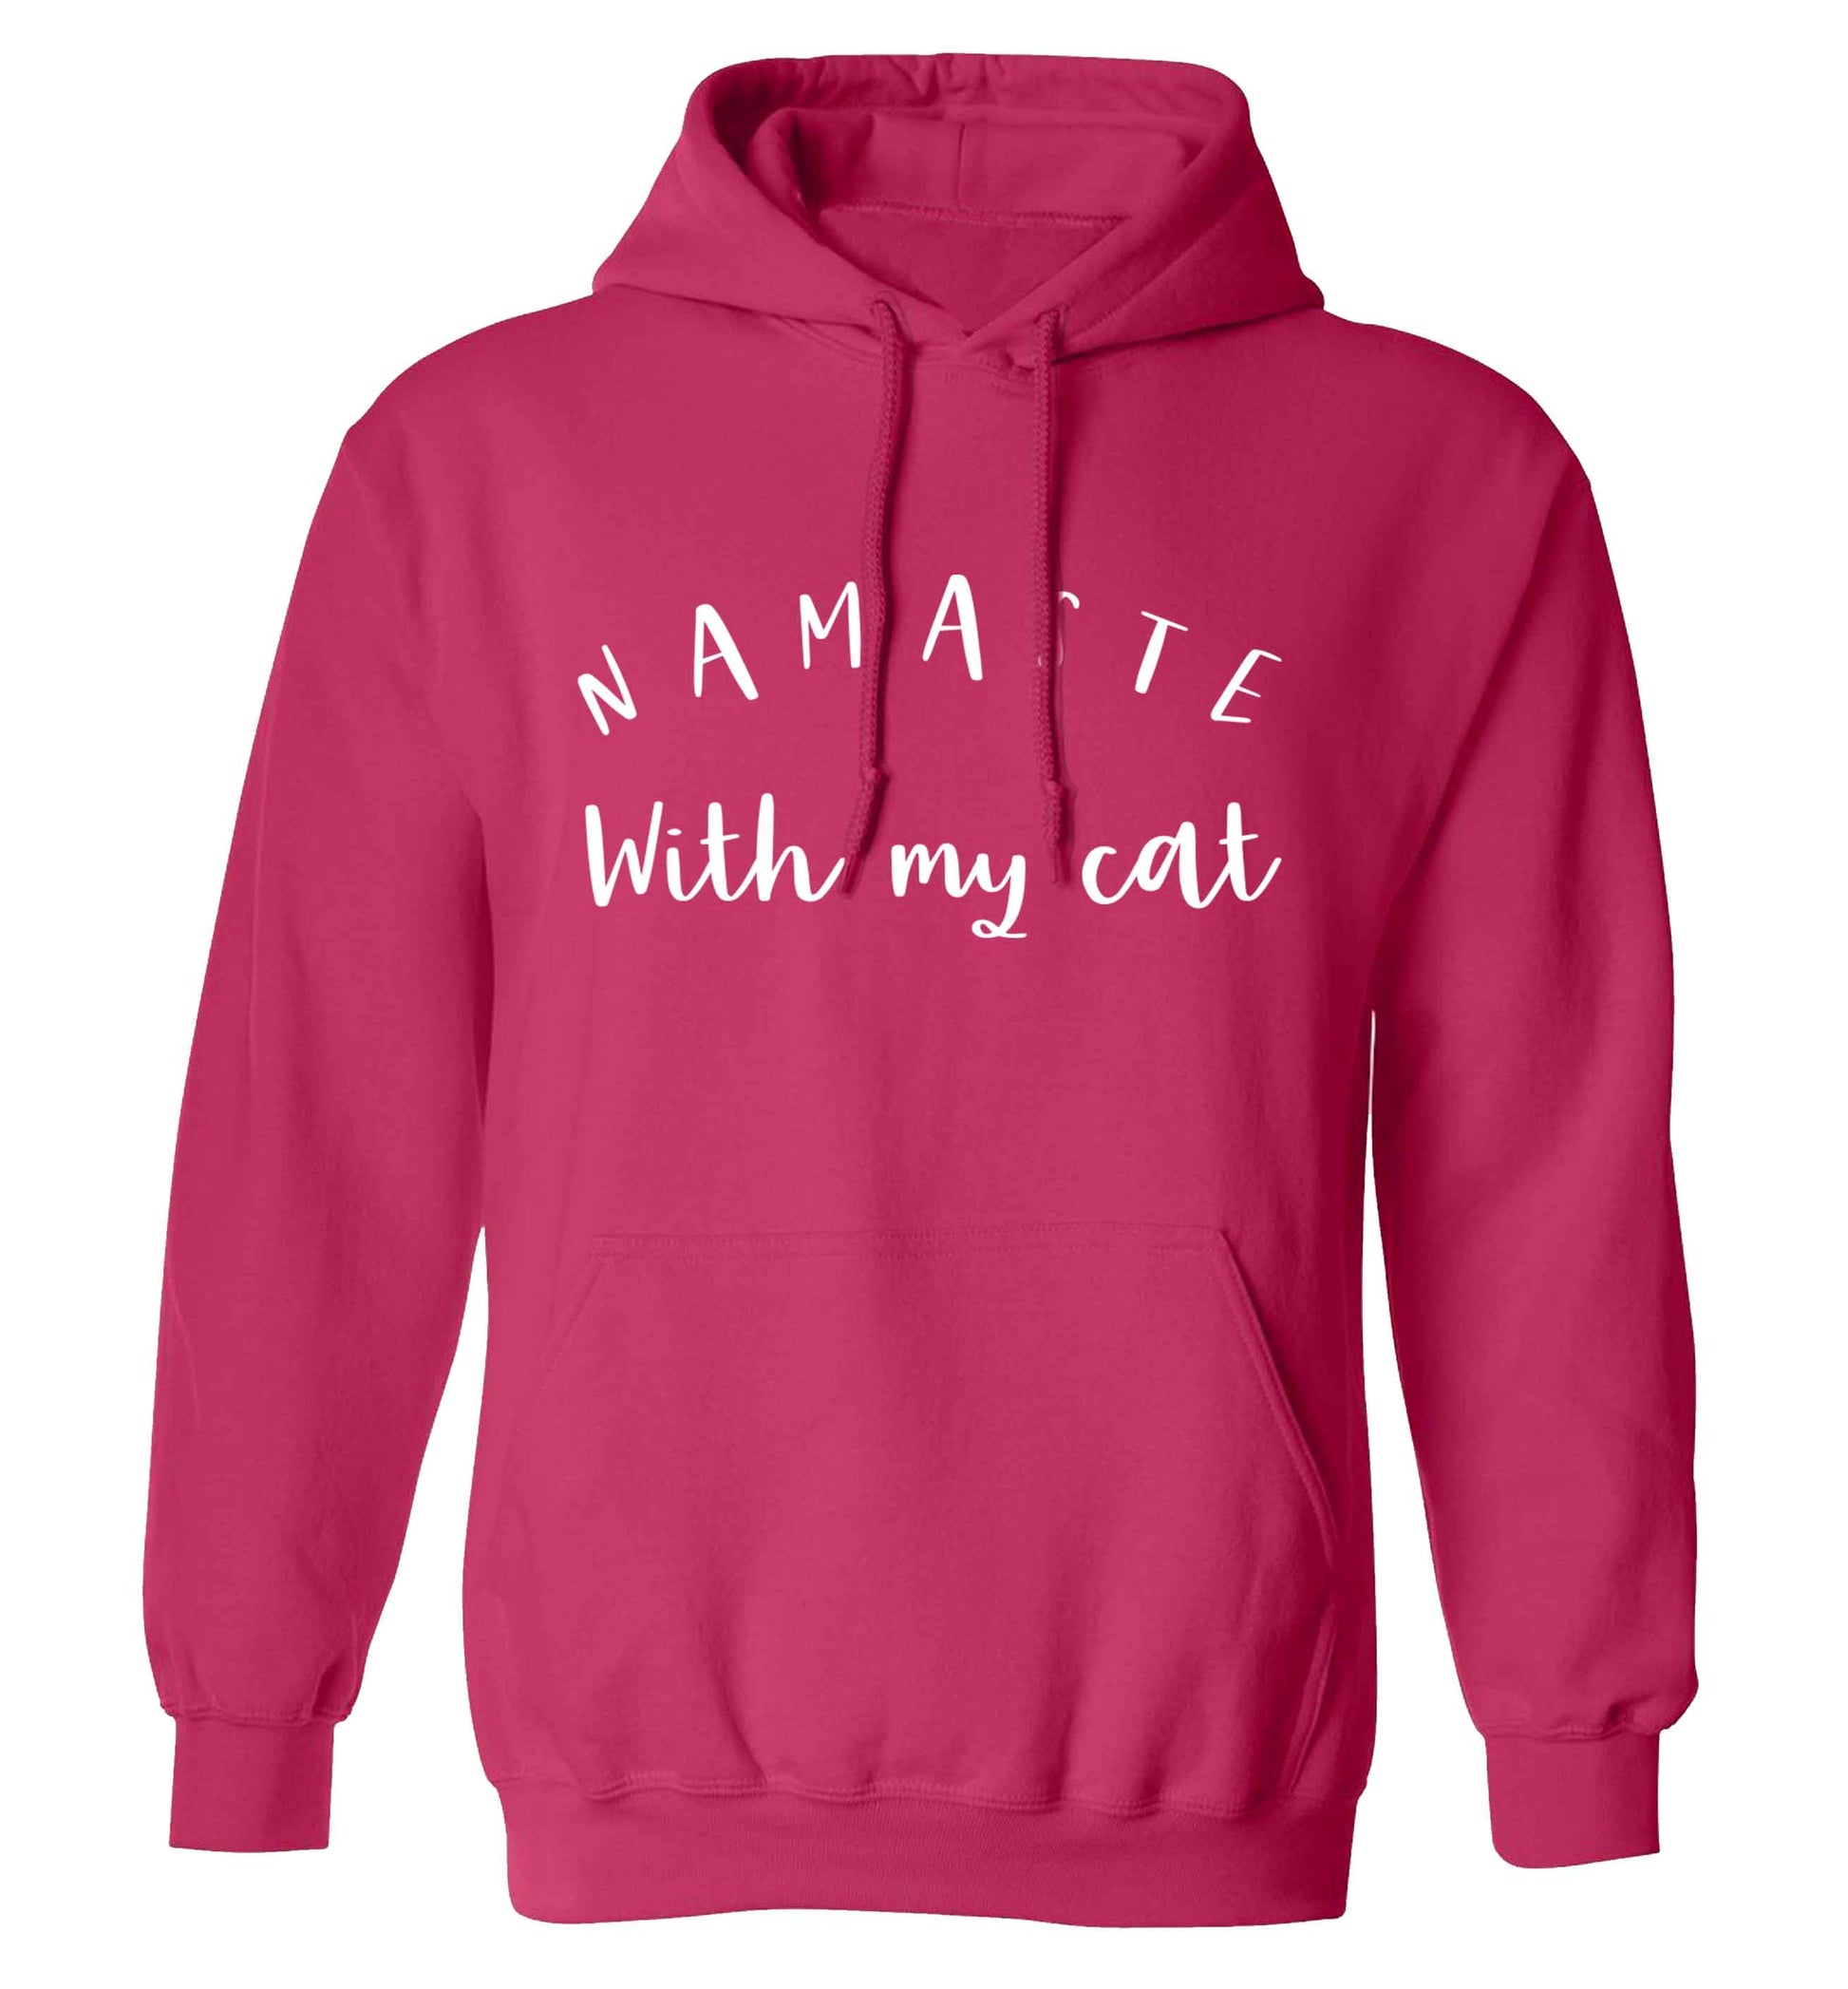 Namaste with my cat adults unisex pink hoodie 2XL